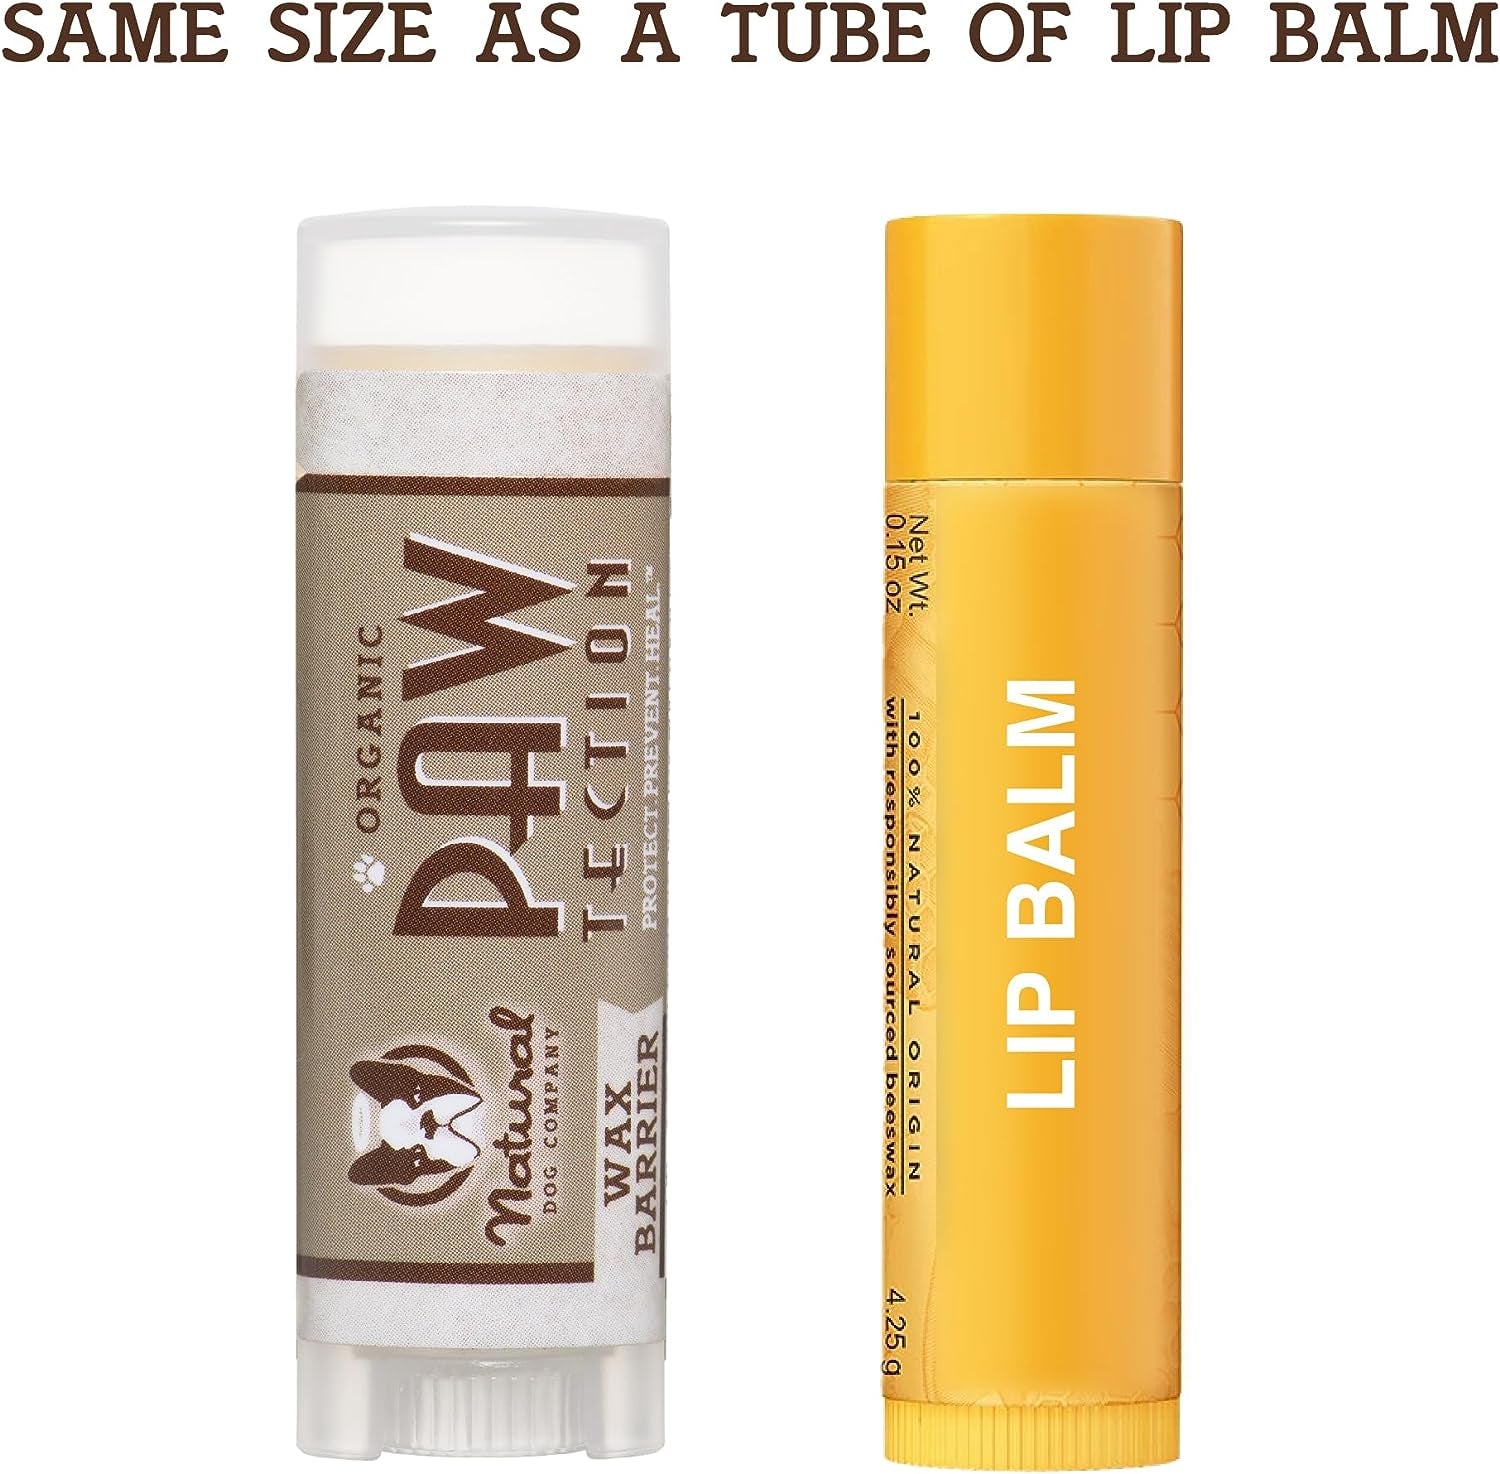 Pawtection Dog Paw Balm, Protects Paws from Hot Surfaces, Sand, Salt, & Snow, Organic, All Natural Ingredients